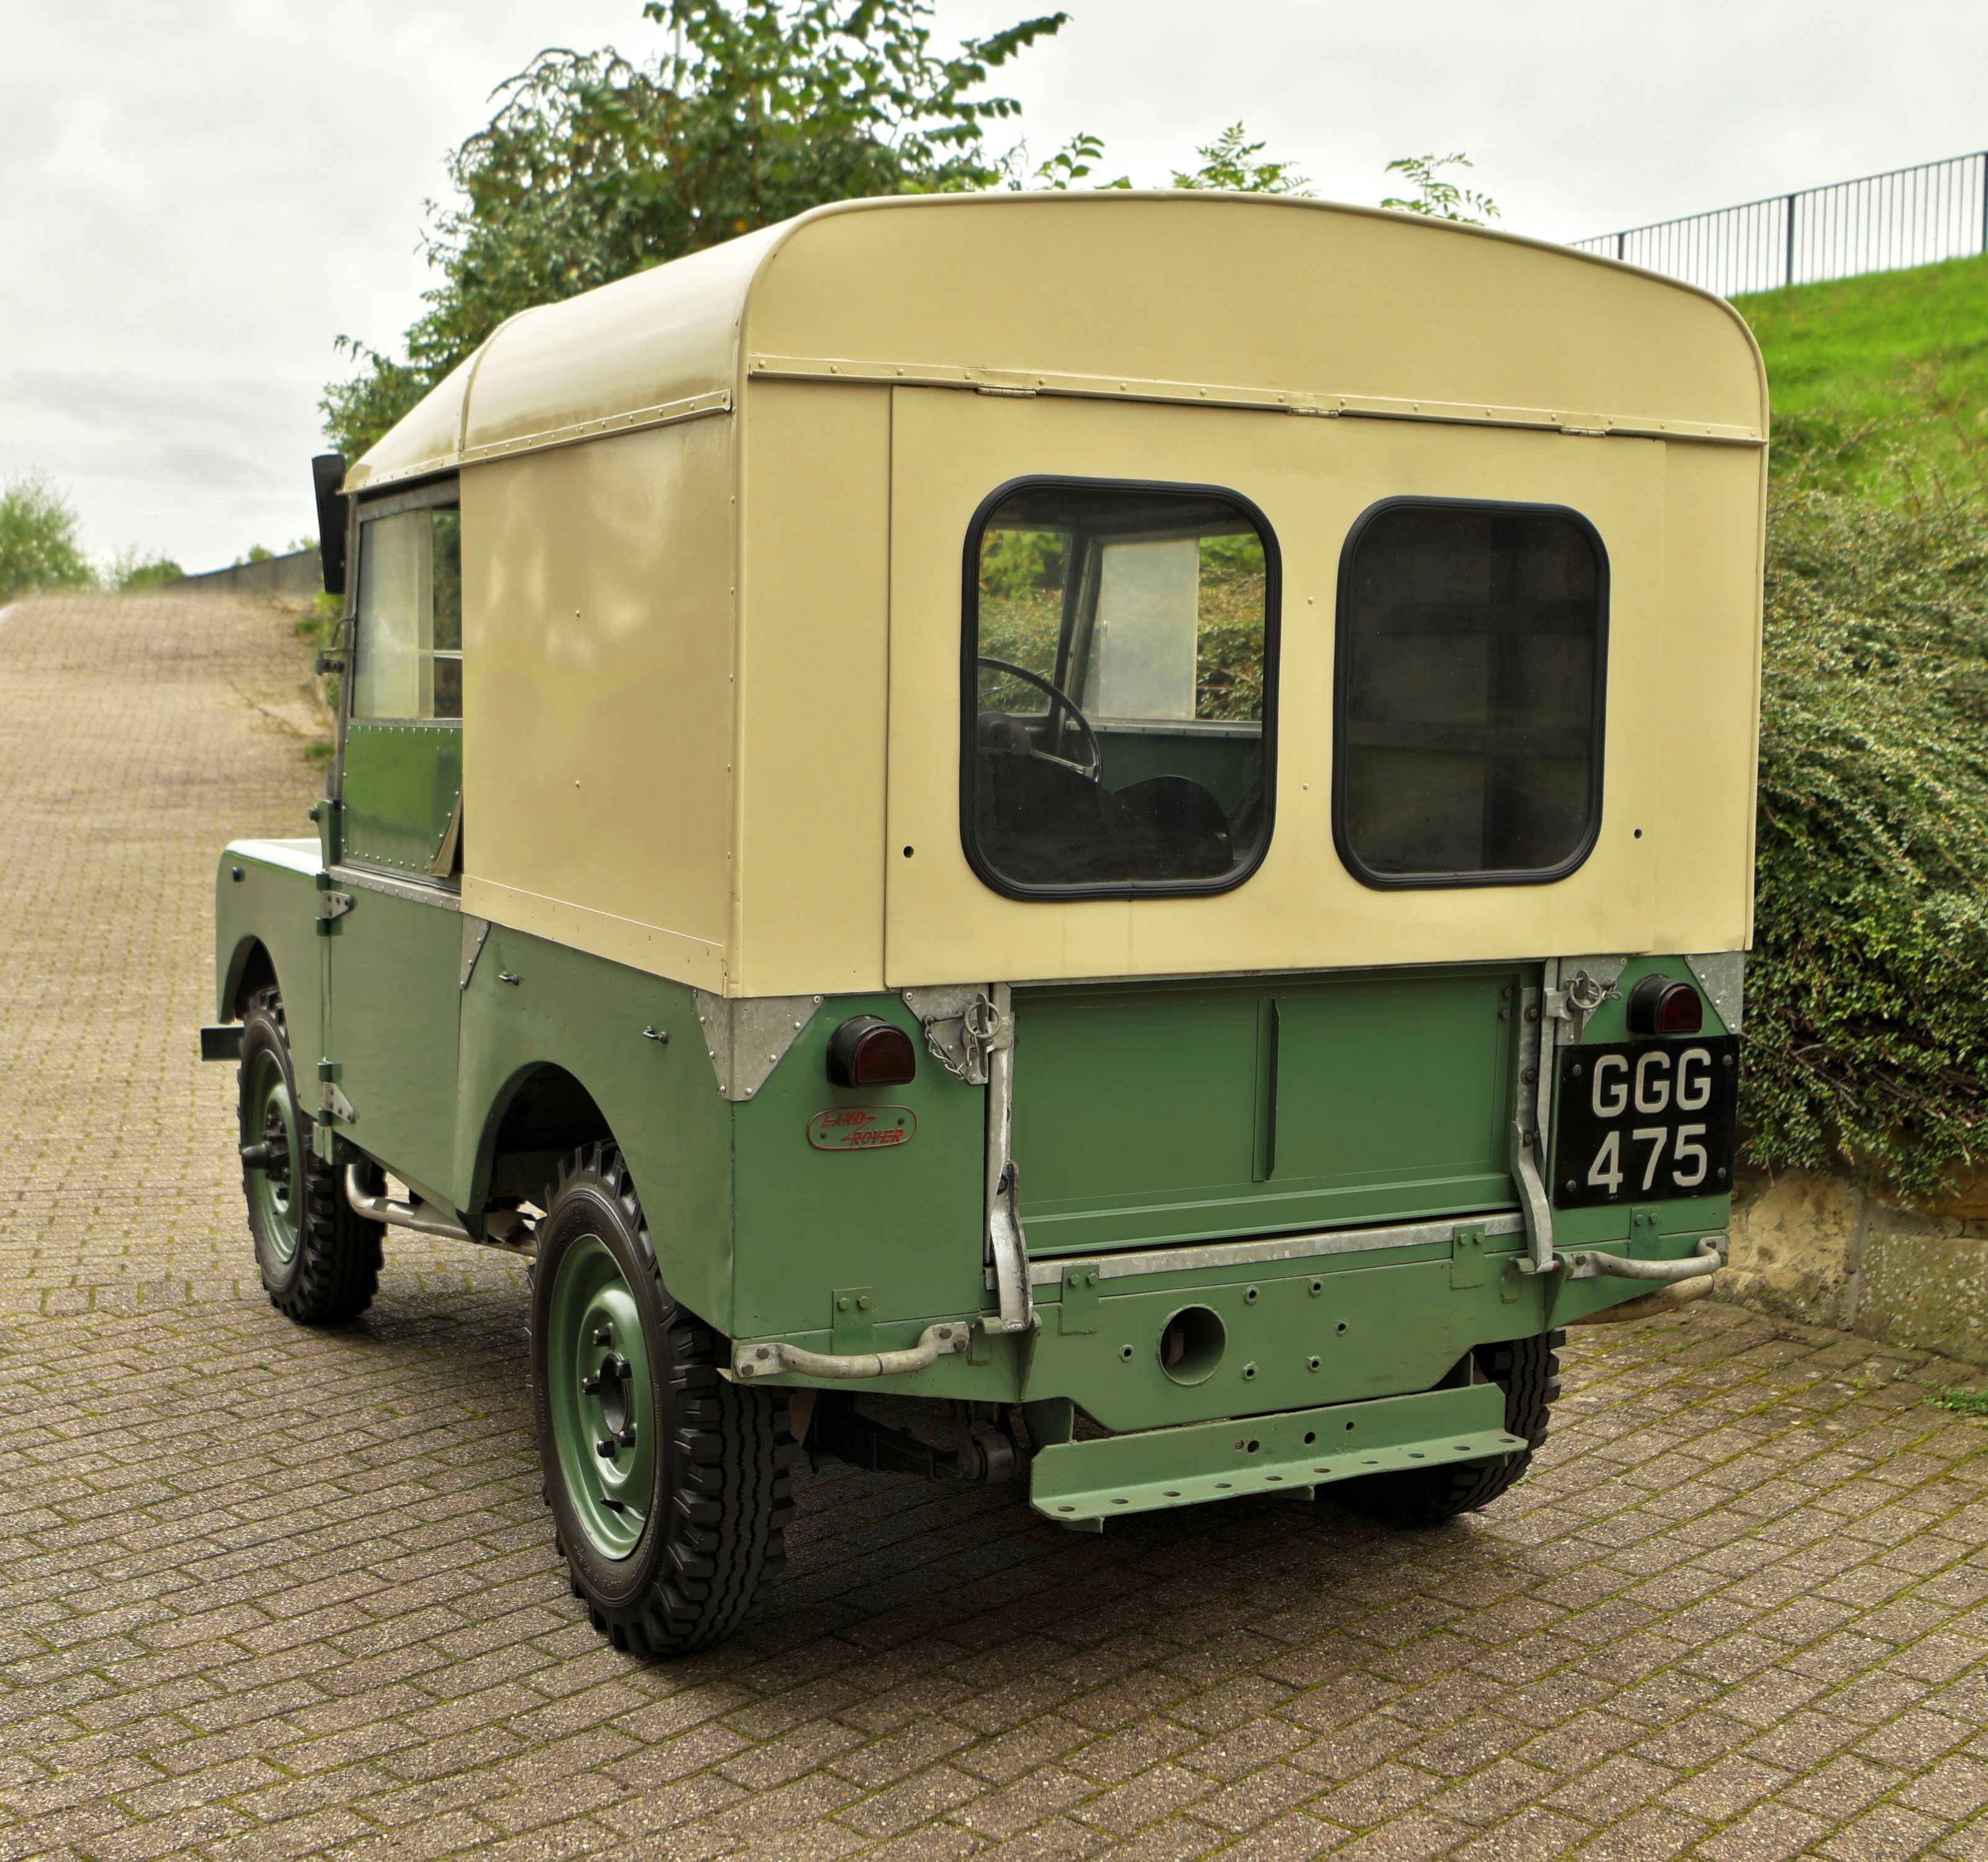 Land rover series 1 swb with hard top q4yeean8gynory0msie53